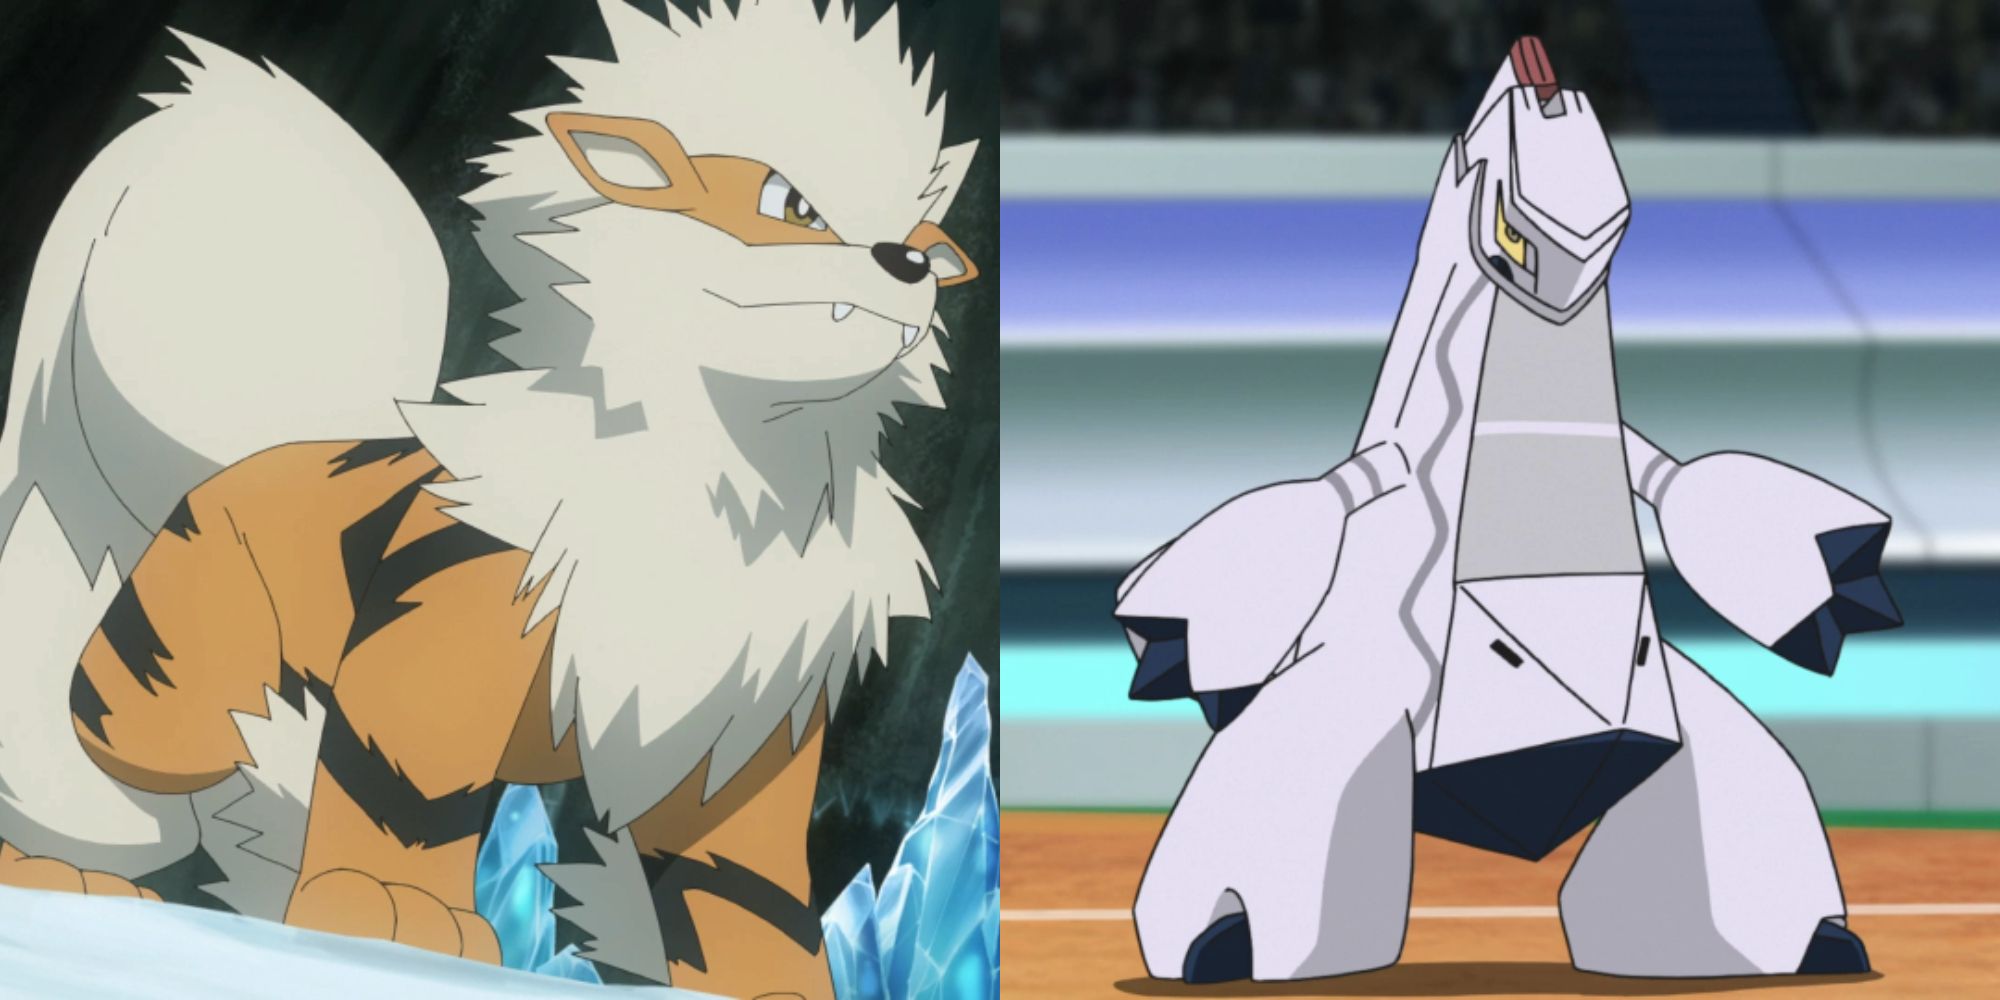 Split image showing Arcanine and Duraludon in the Pokémon Anime.